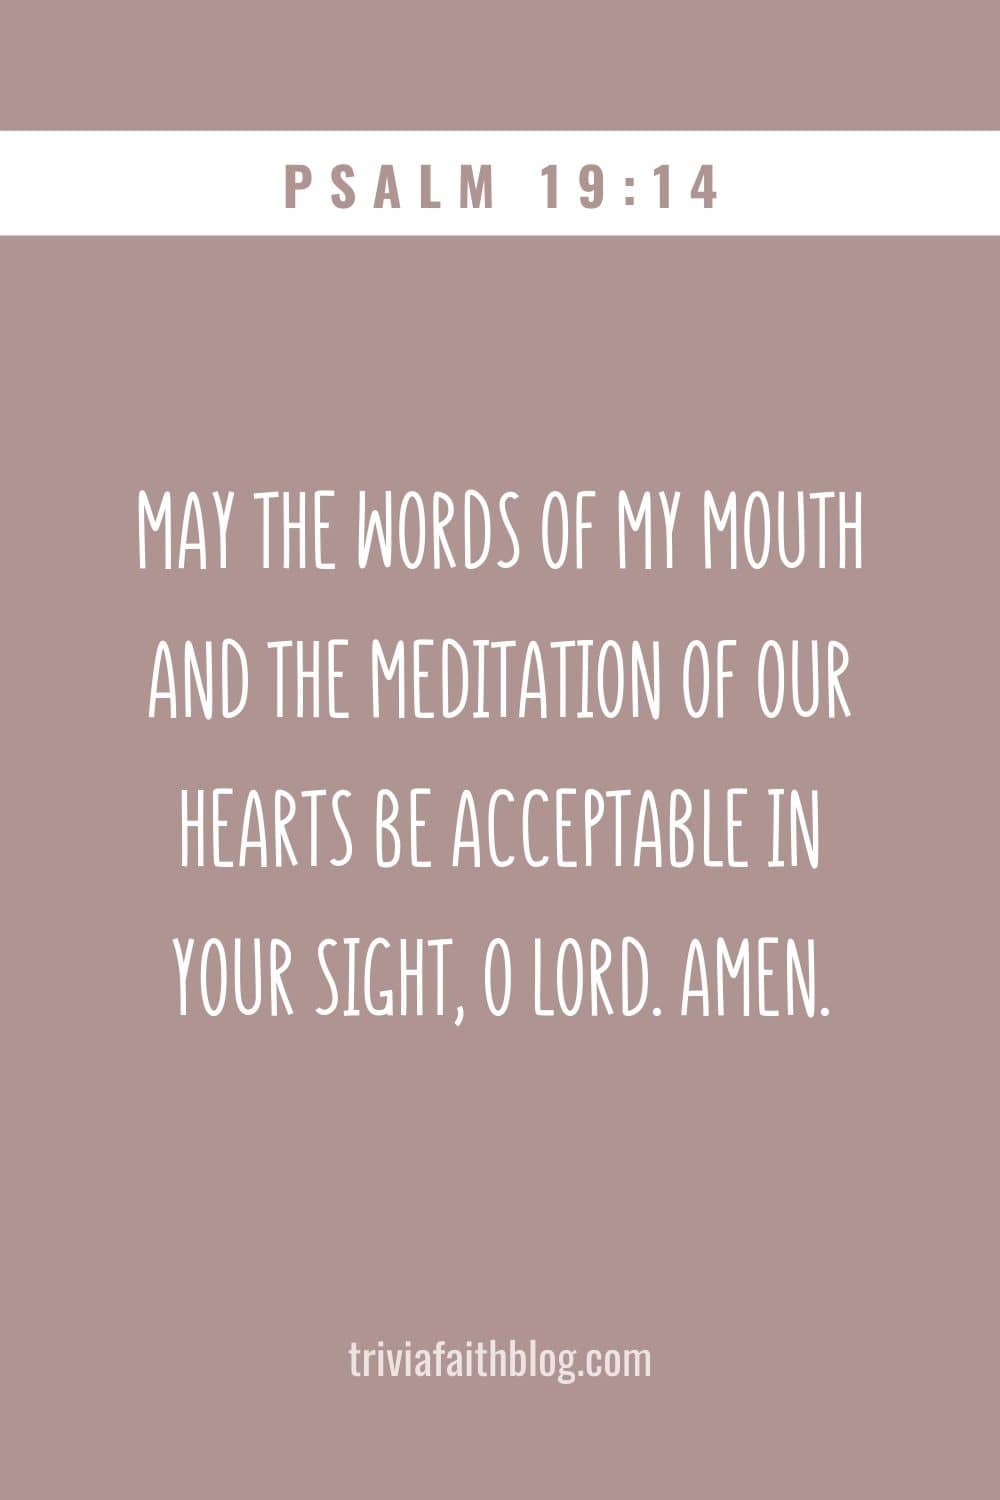 May the words of my mouth and the meditation of our hearts be acceptable in your sight, O Lord